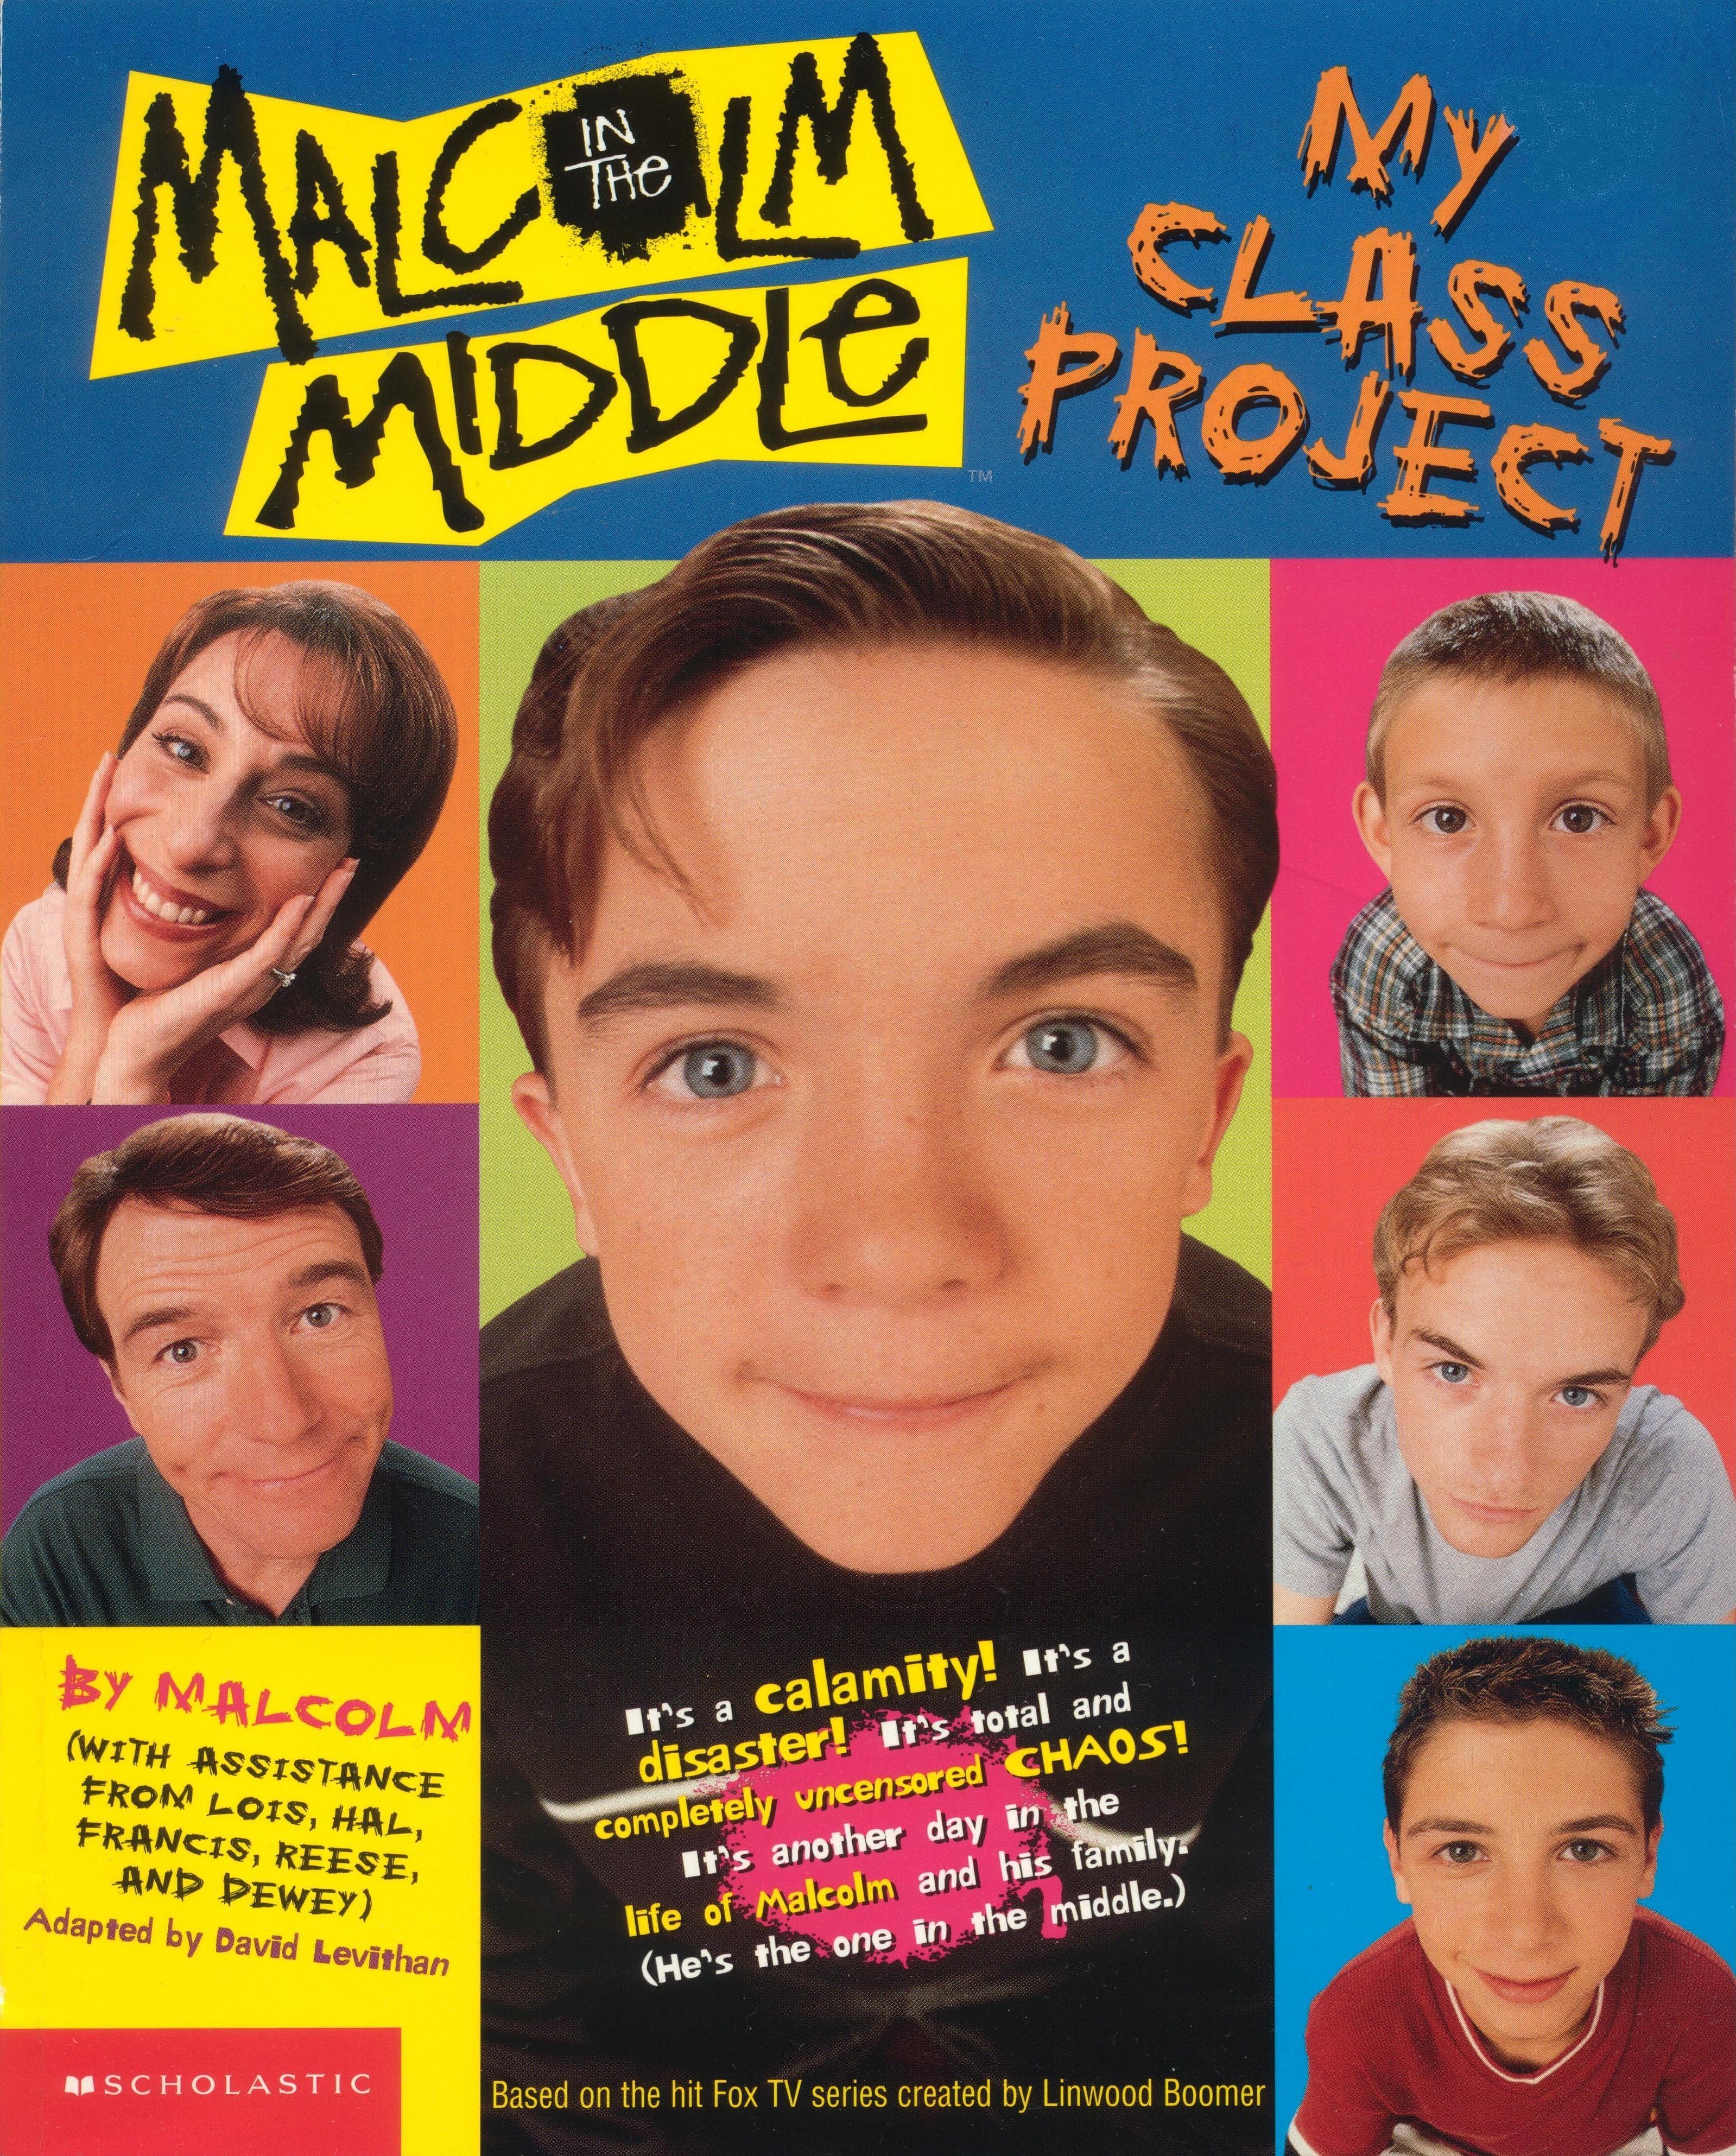 'My Class Project' book cover